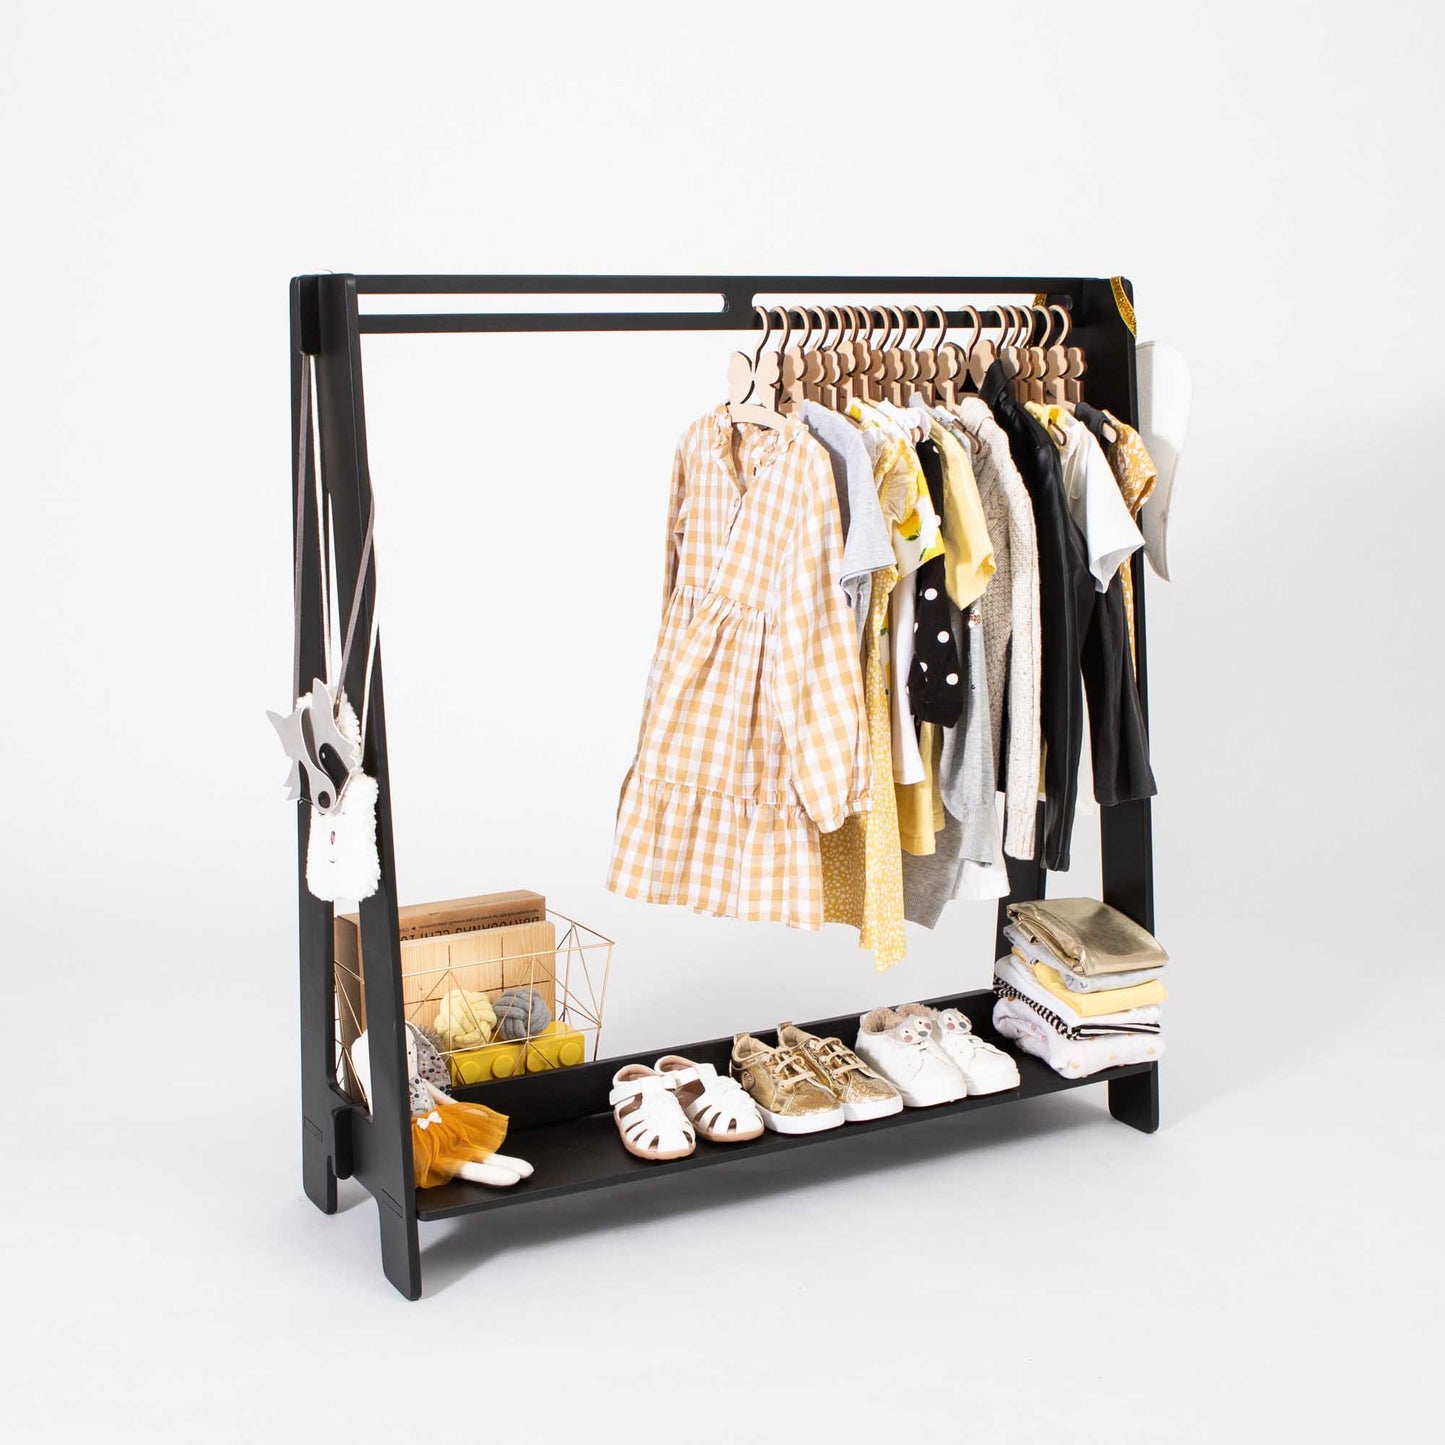 An open wardrobe with toddler clothing hanging on a black Kids' clothing rack from Sweet Home From Wood, creating a Montessori-inspired wardrobe setup.